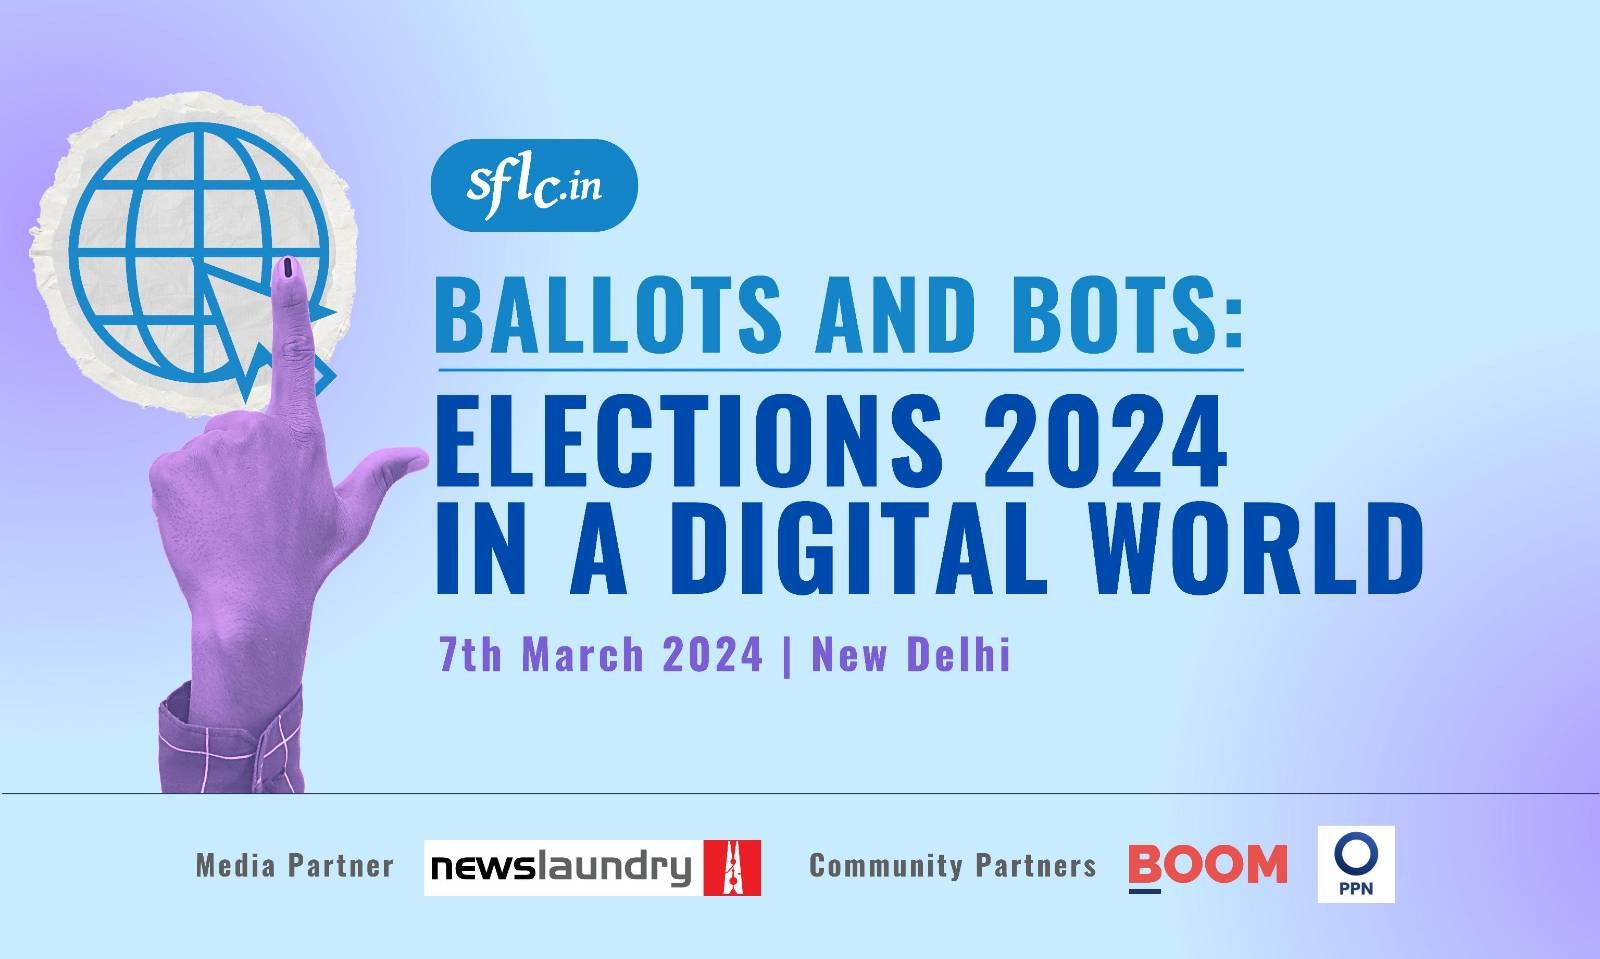 Ballots and Bots: Elections 2024 in a Digital World